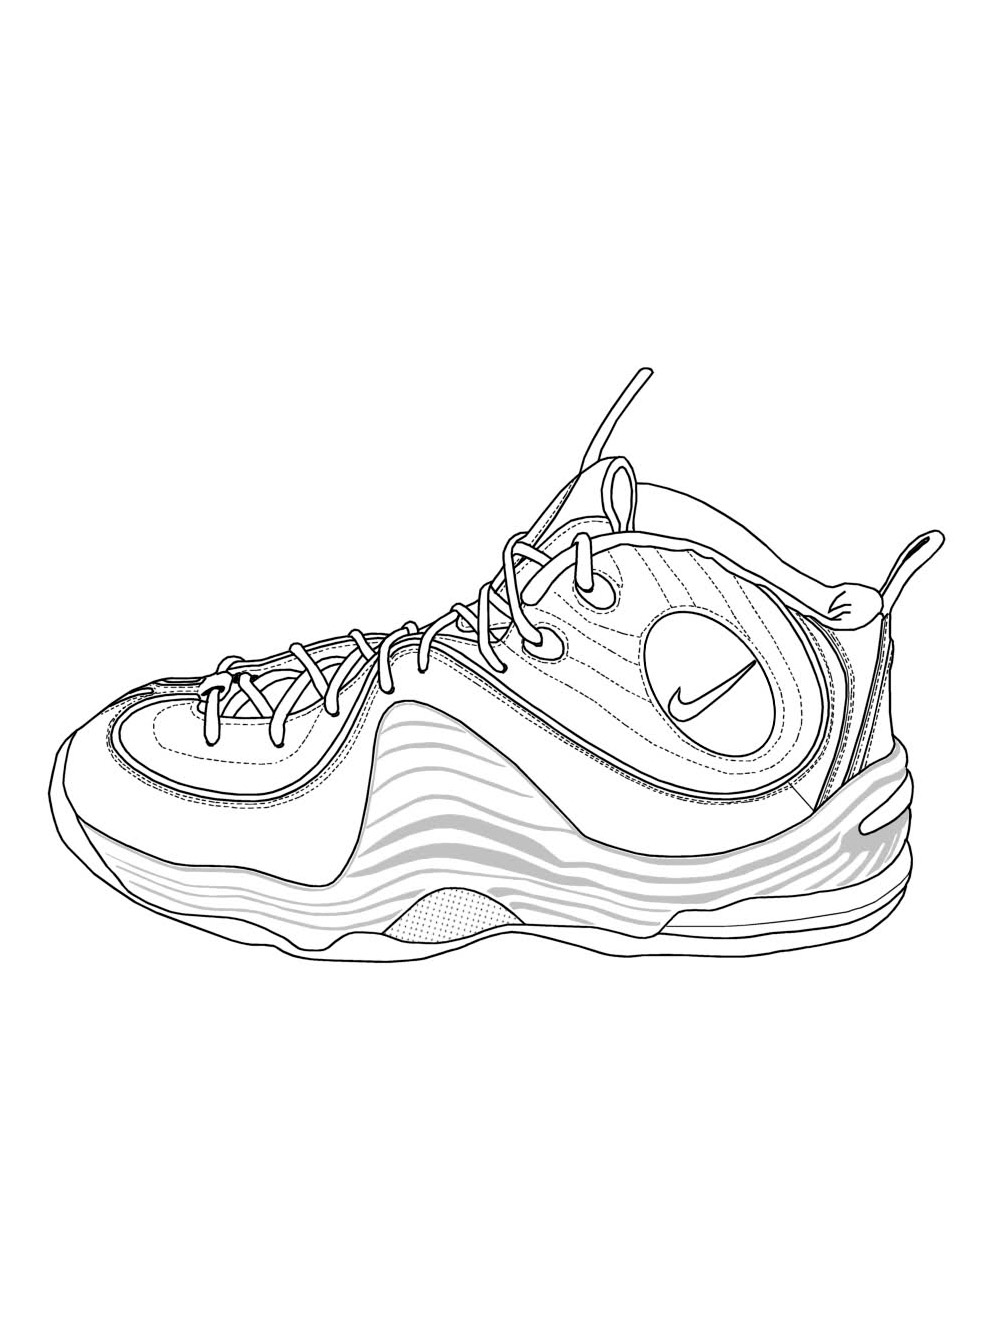 Free Nike coloring pages. Download and print Nike coloring pages